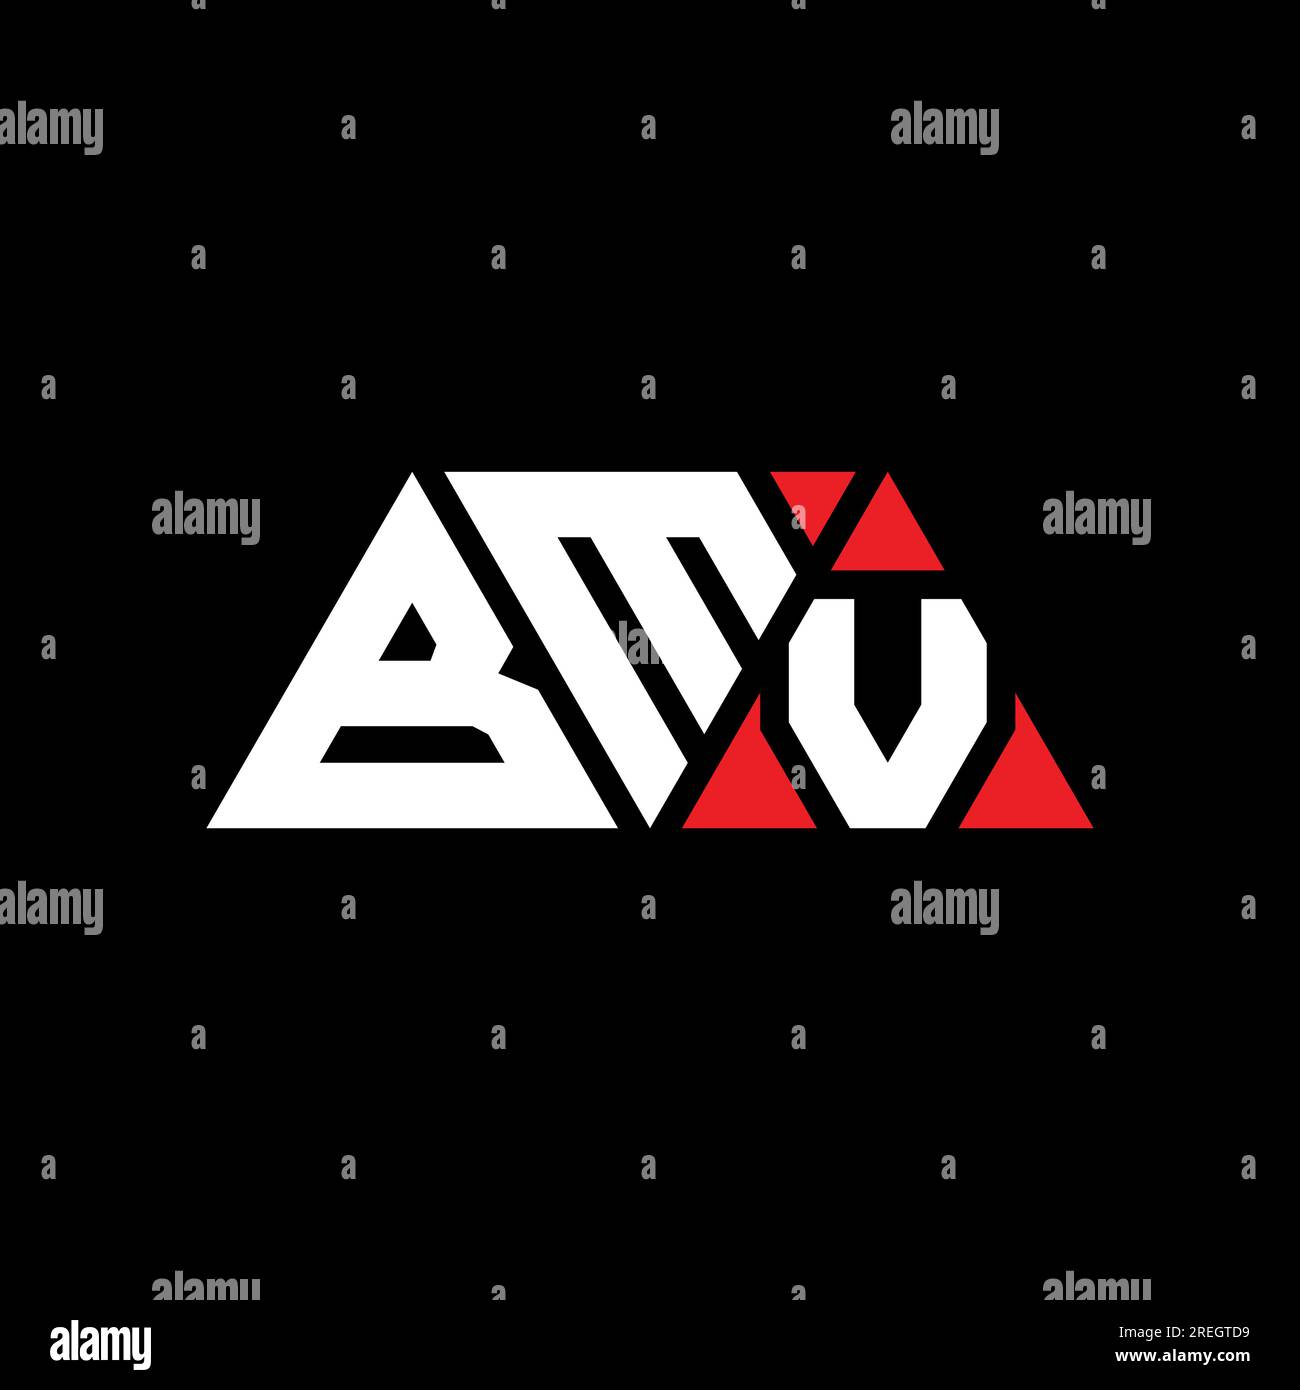 BMV triangle letter logo design with triangle shape. BMV triangle logo design monogram. BMV triangle vector logo template with red color. BMV triangul Stock Vector